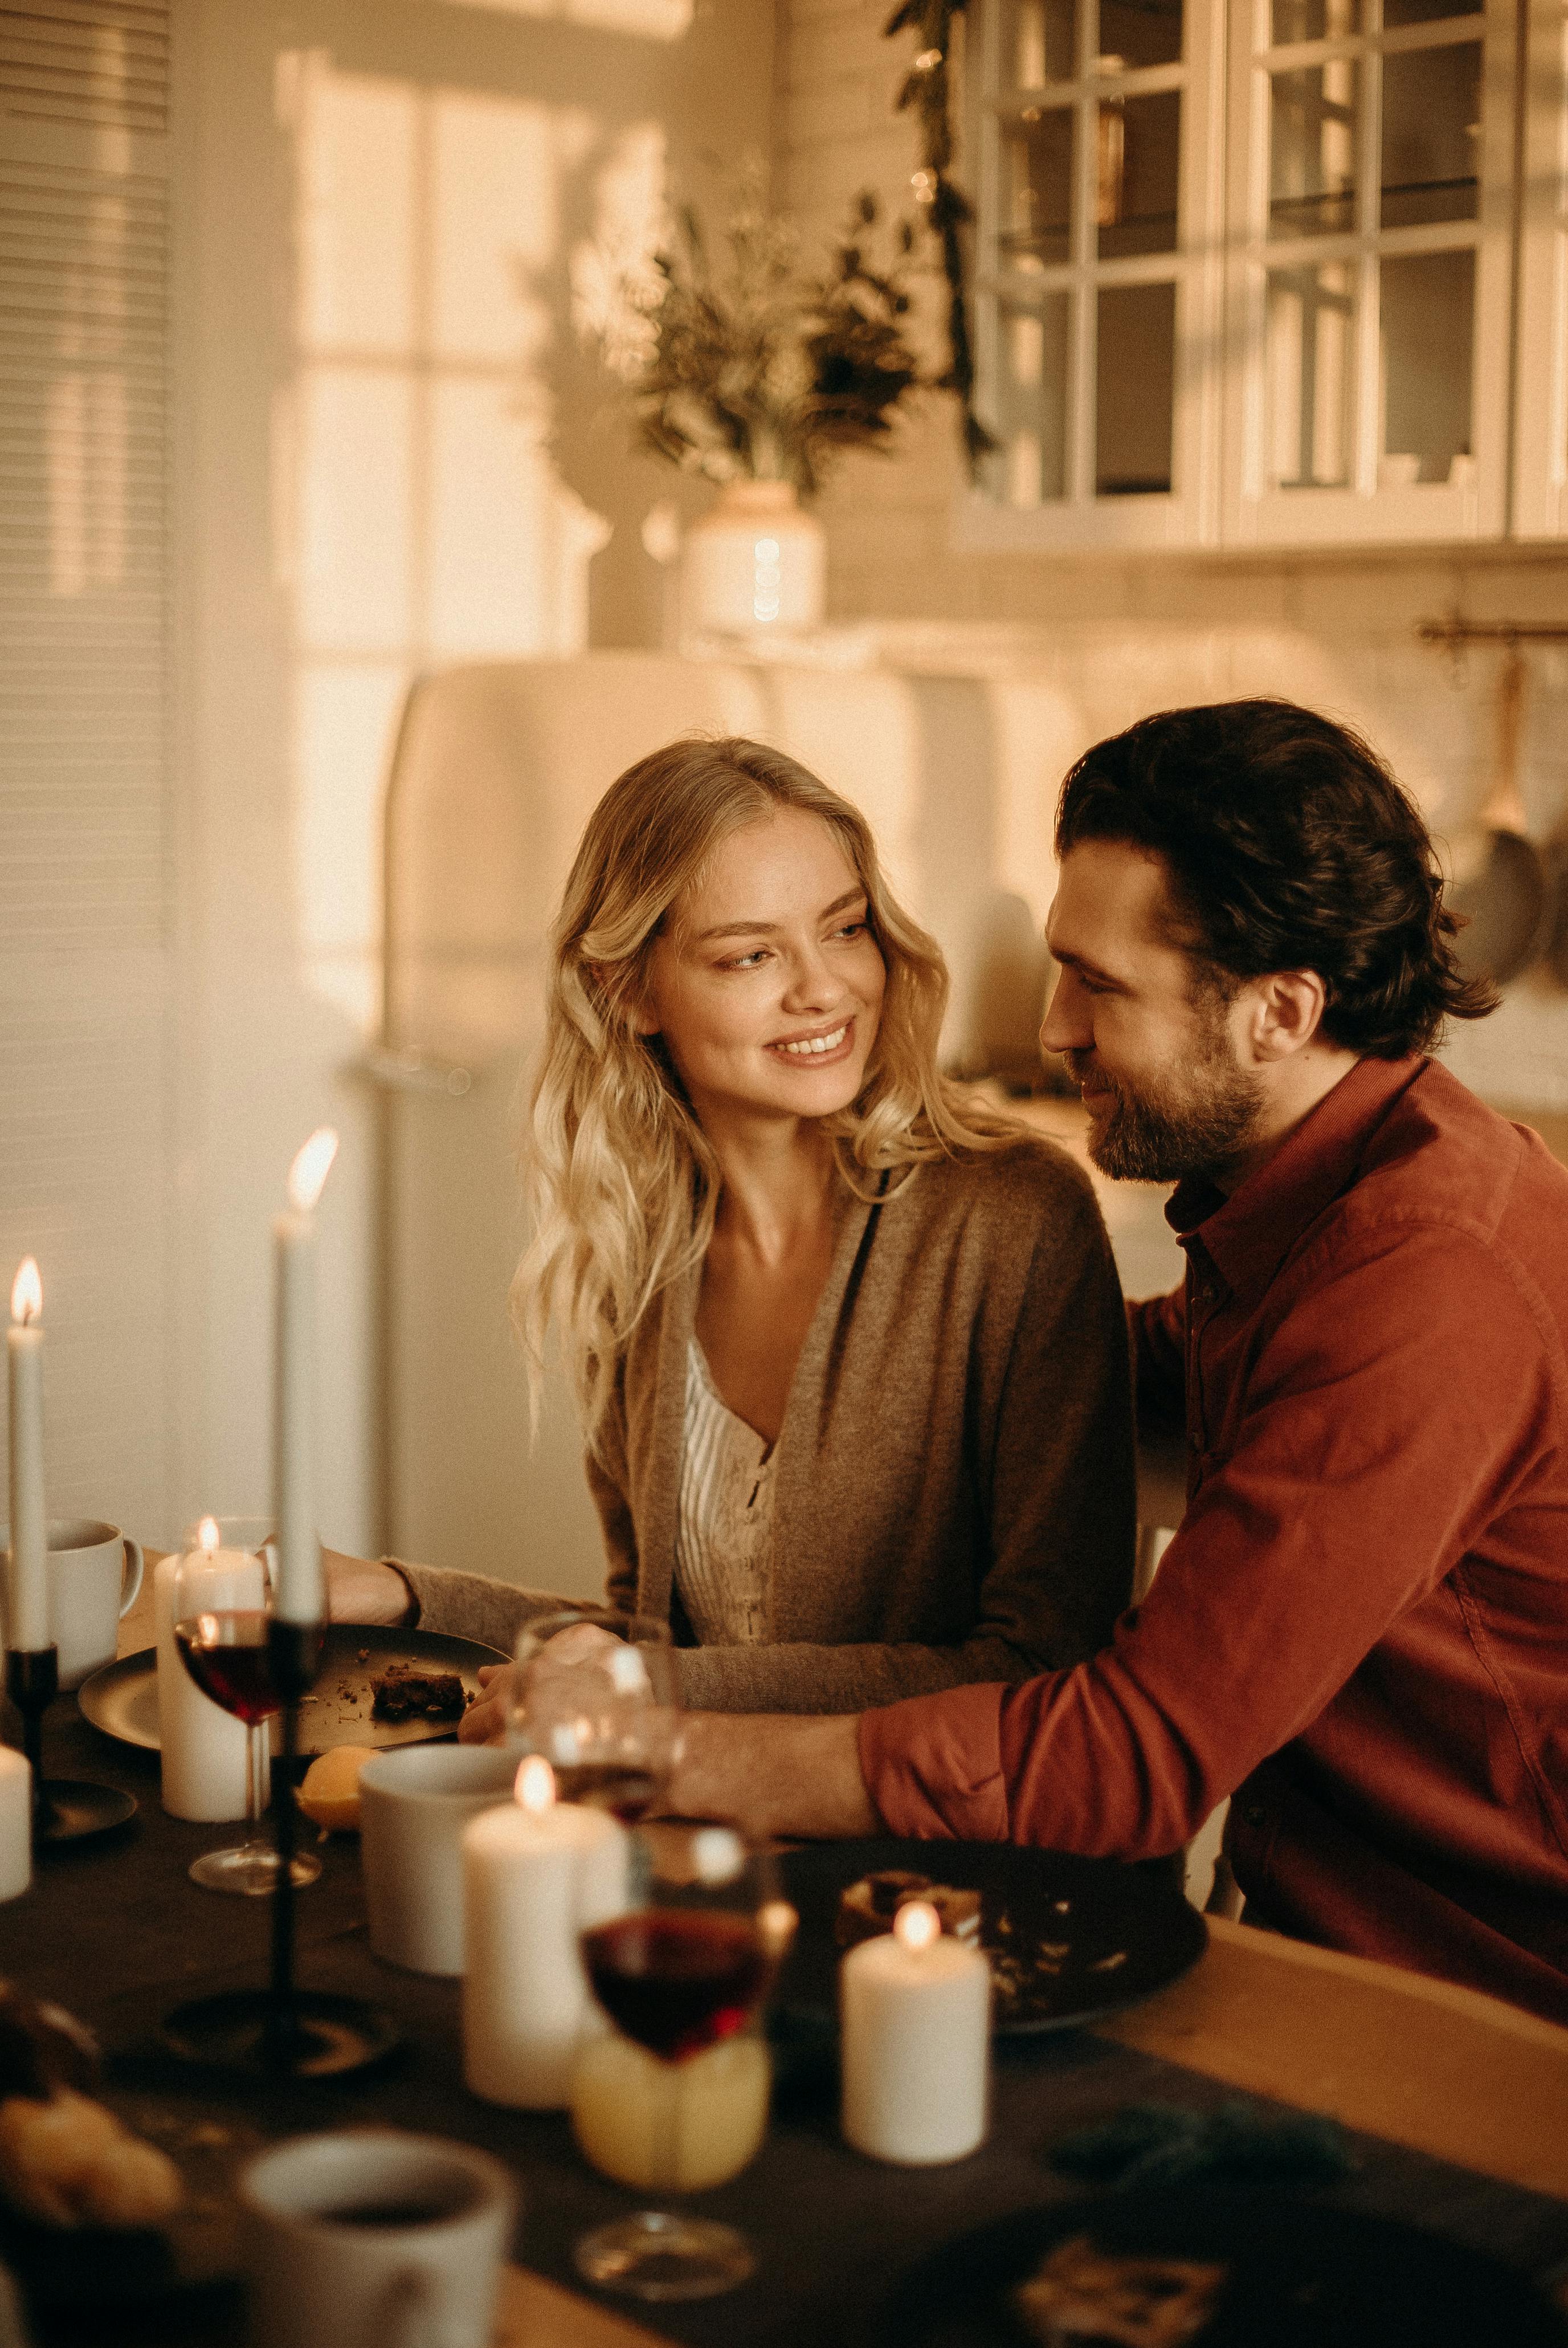 A couple enjoying a romantic meal and drinks | Source: Pexels